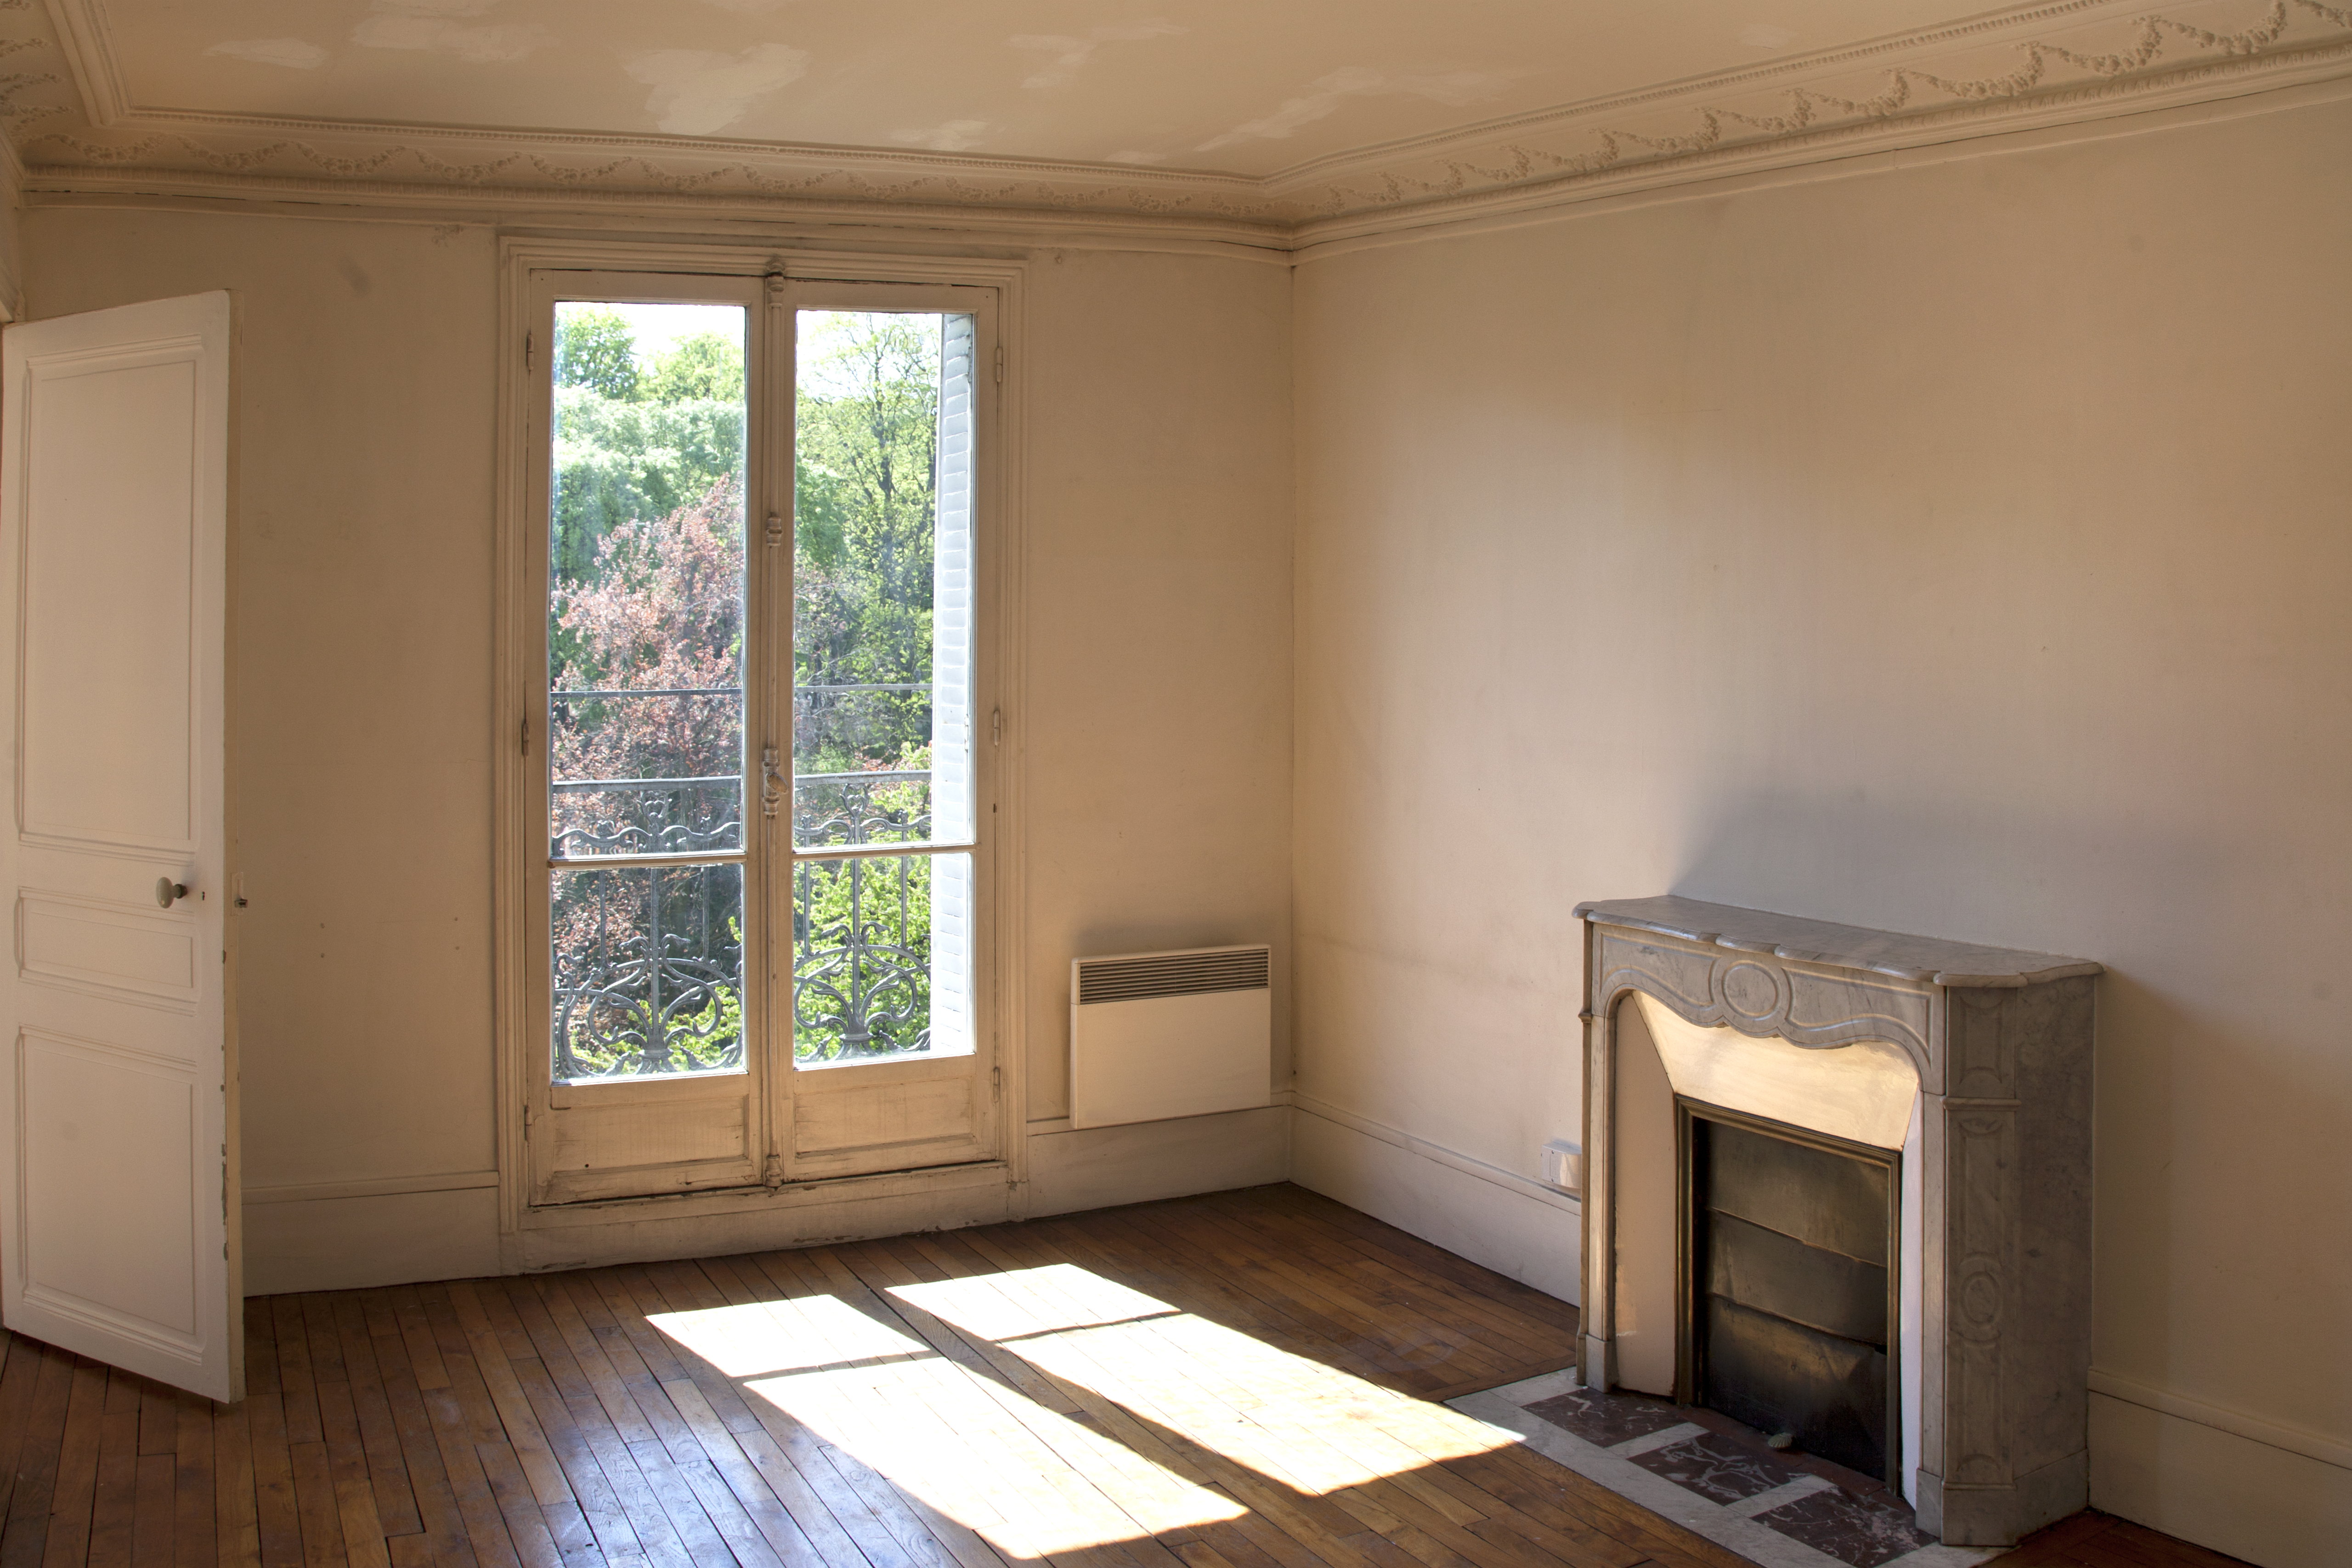 An empty house | Source: Getty Images